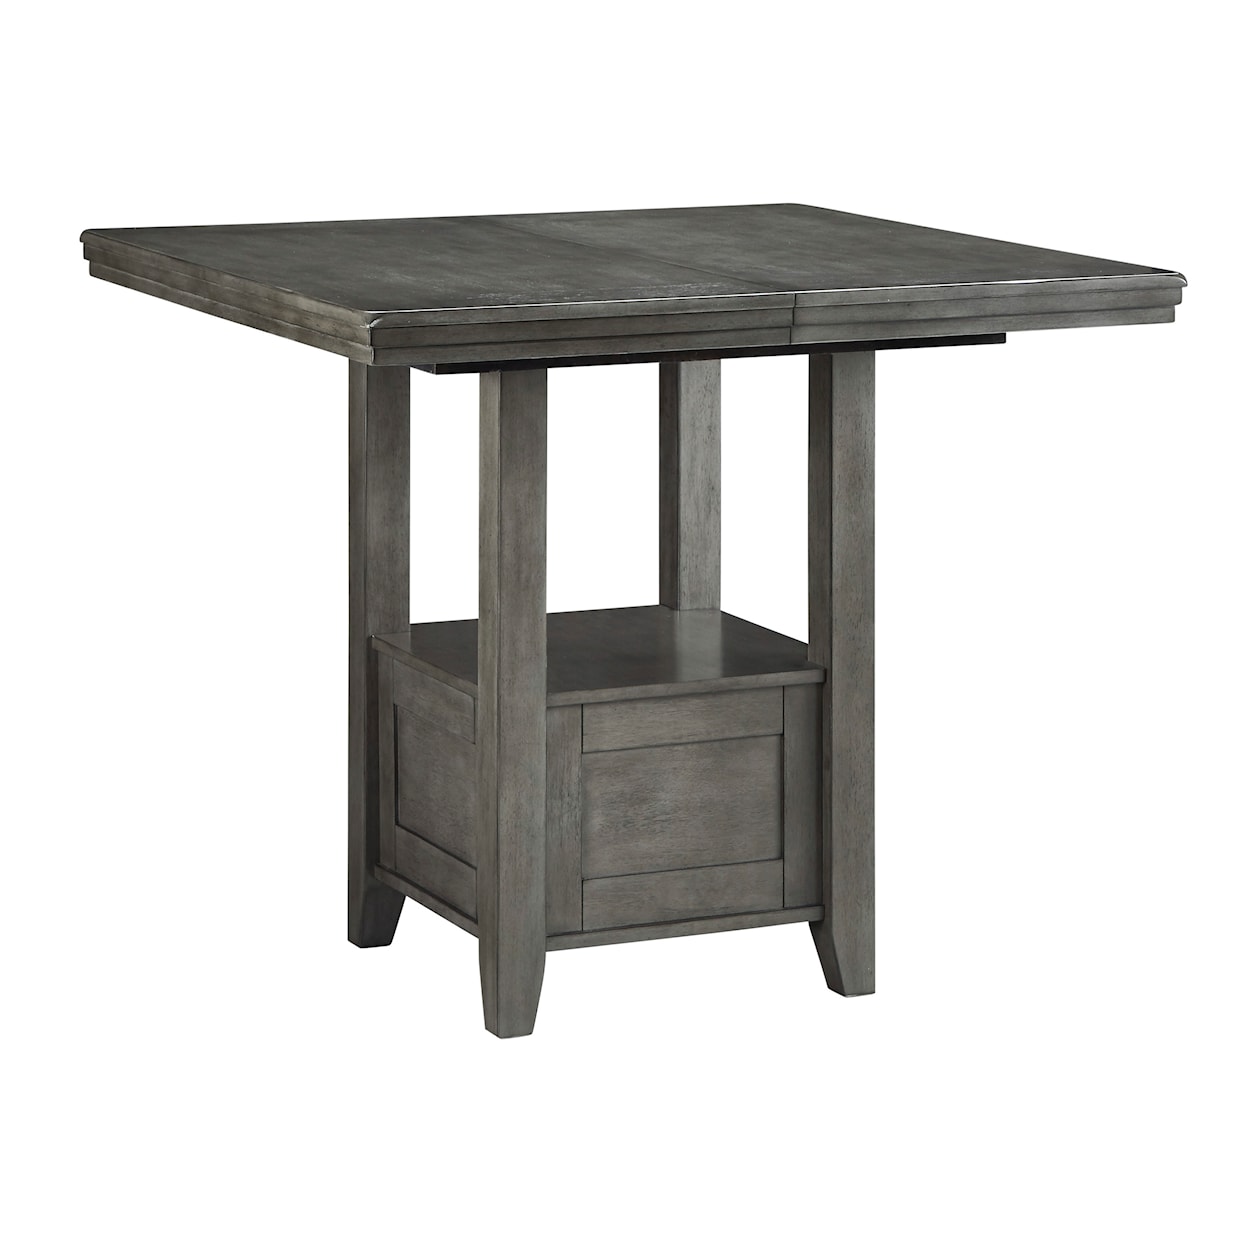 Signature Design by Ashley Furniture Hallanden Counter Height Dining Extension Table